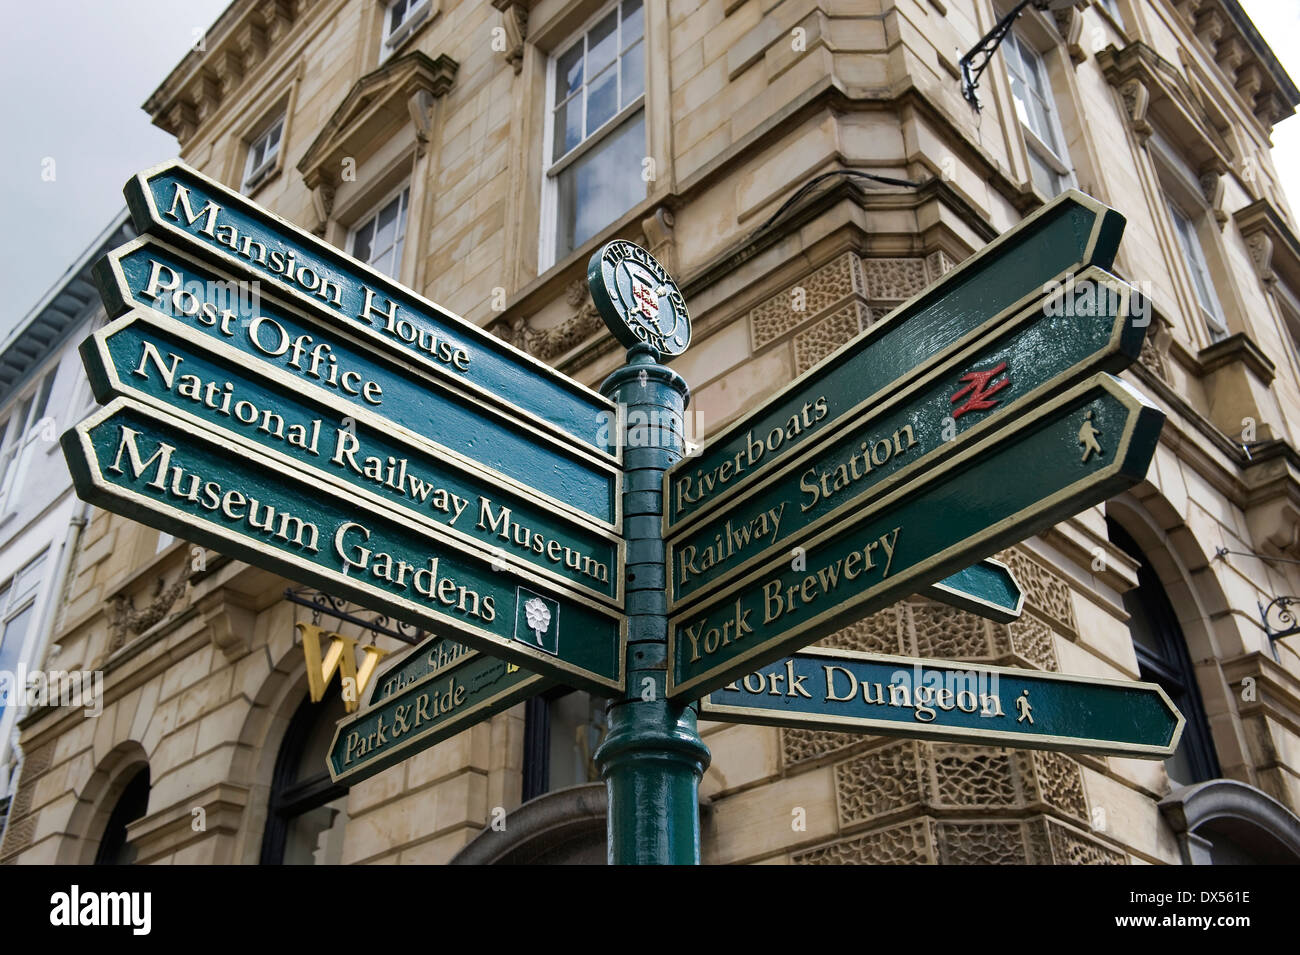 Street sign in York city centre, UK, giving directions to York Dungeon, Mansion House, Riverboats, Railway Station, York Brewery Stock Photo